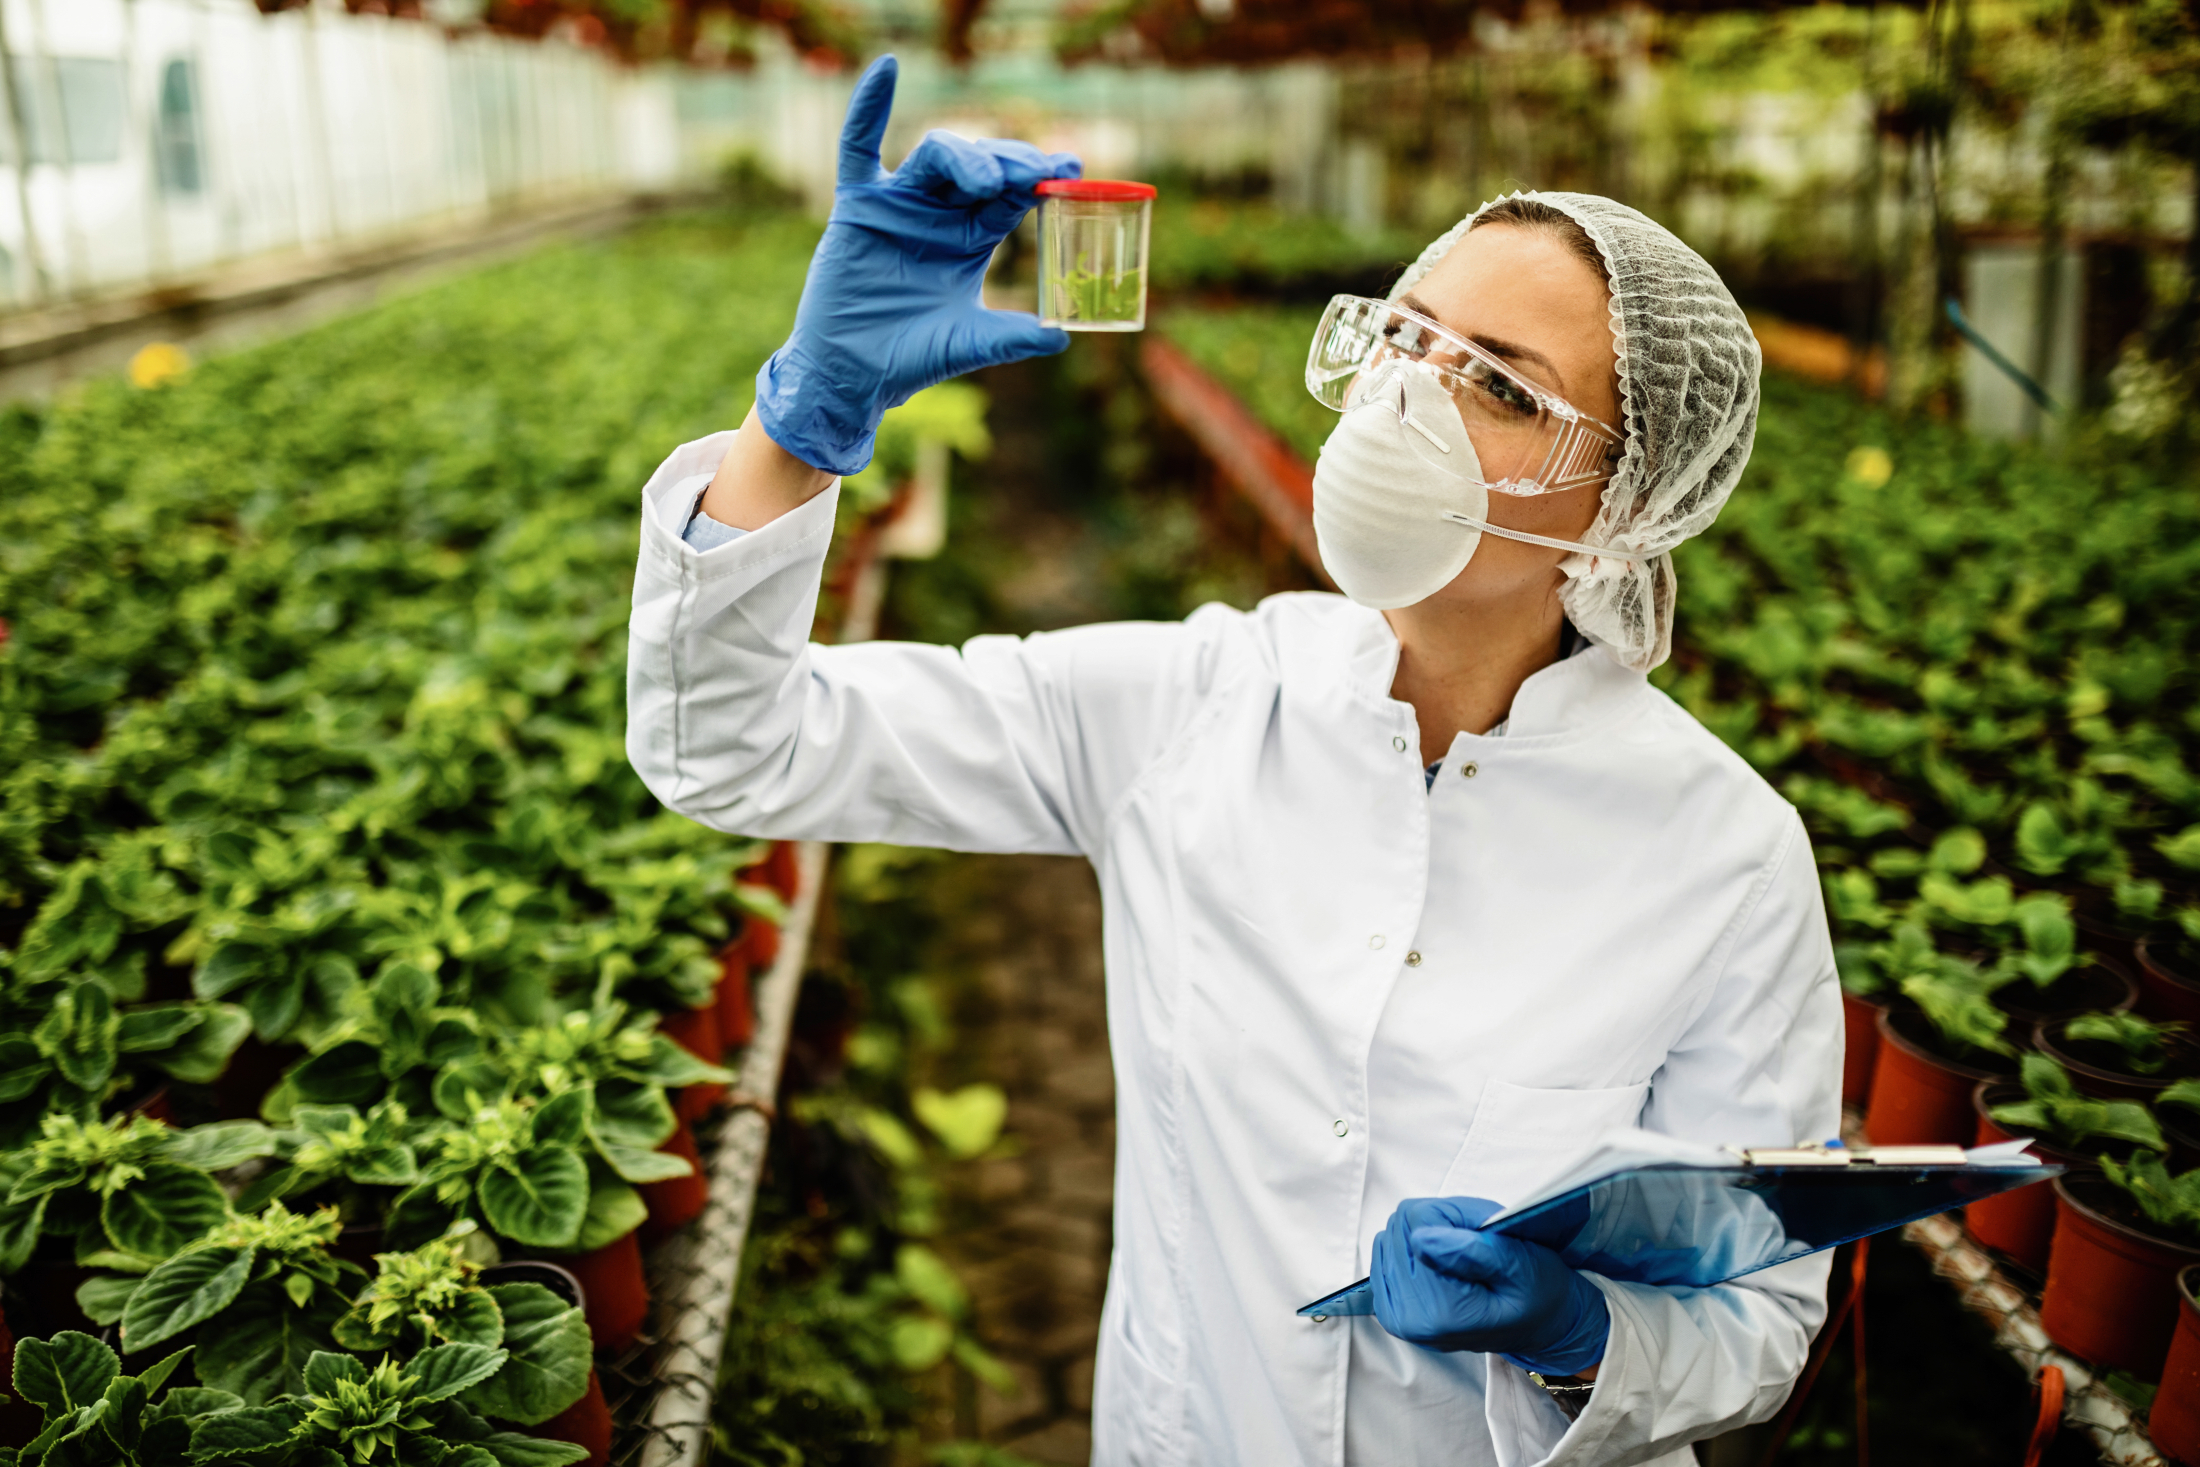 female-botanist-examining-plant-sample-during-quality-control-inspection-greenhouse.jpg